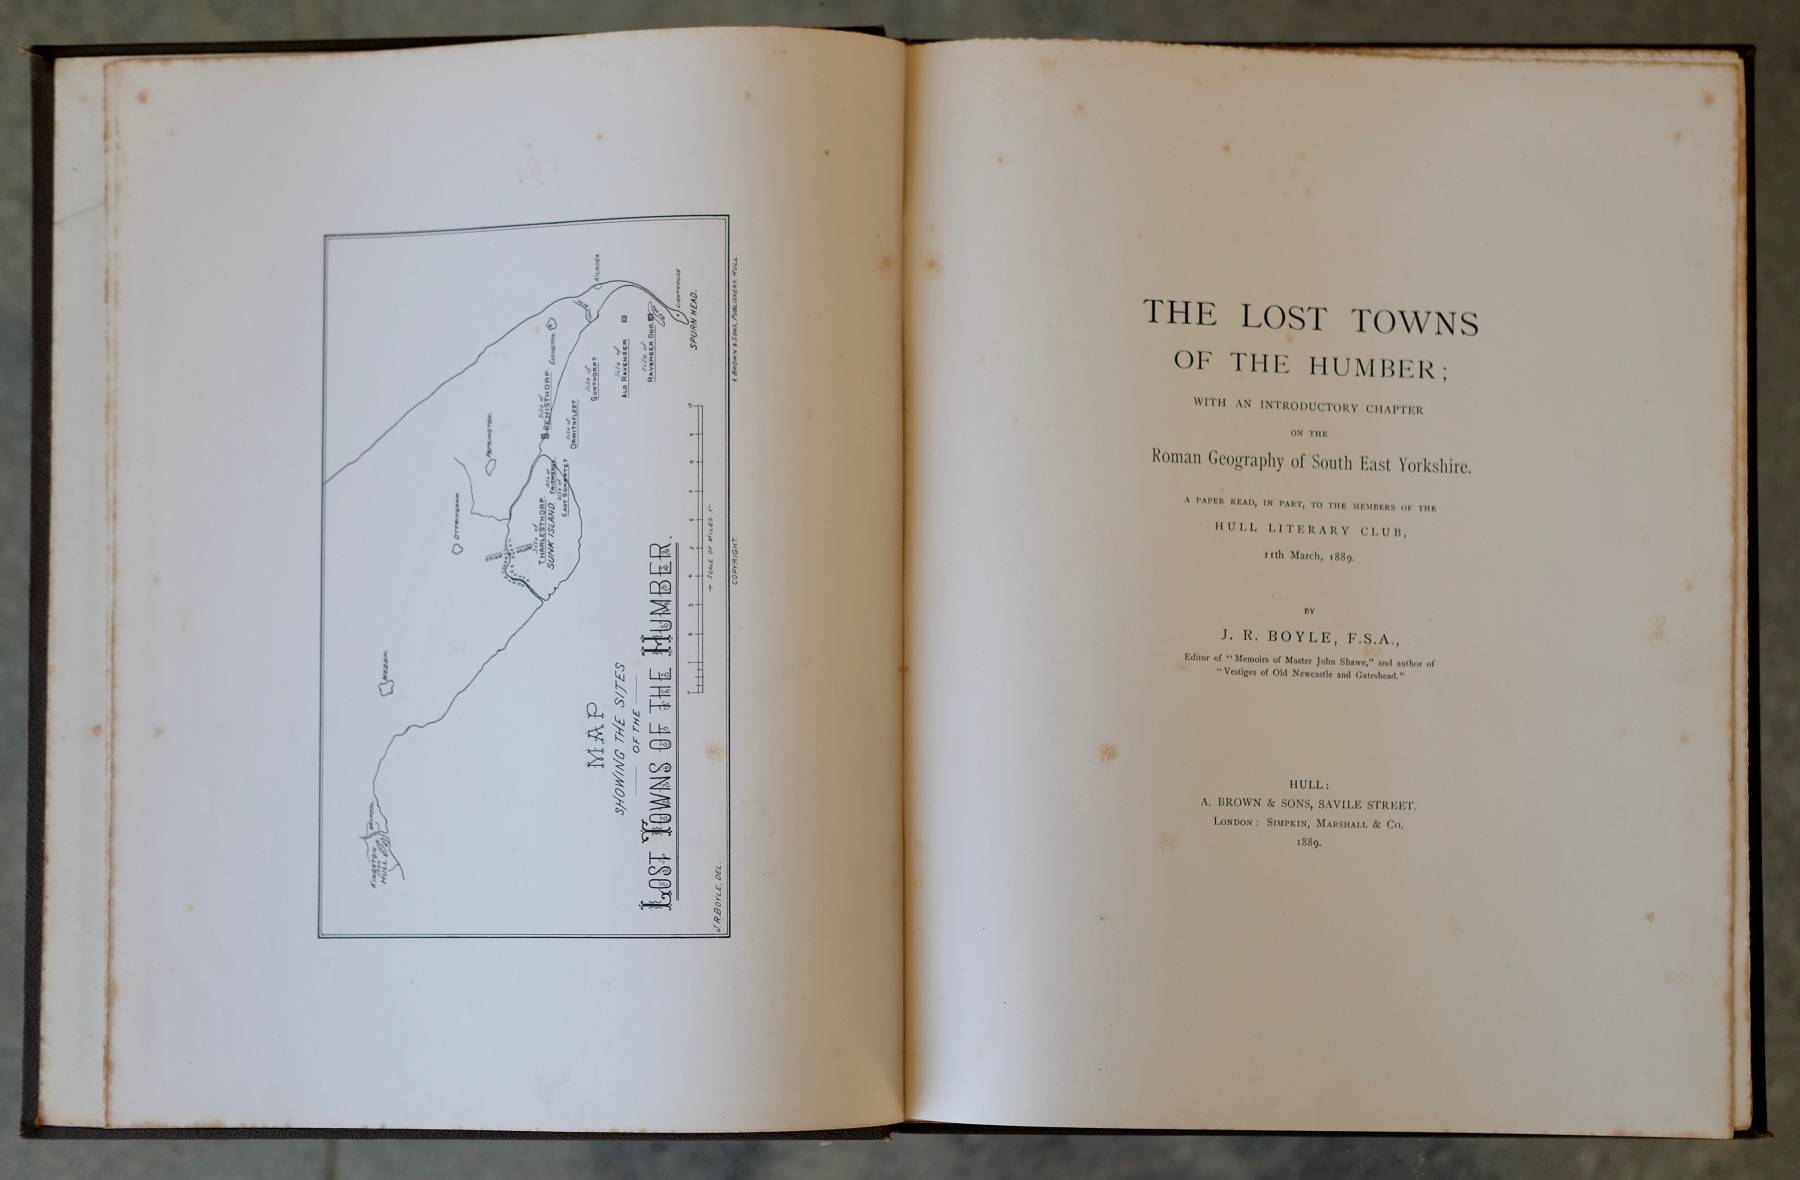 The Lost Towns of the Humber 